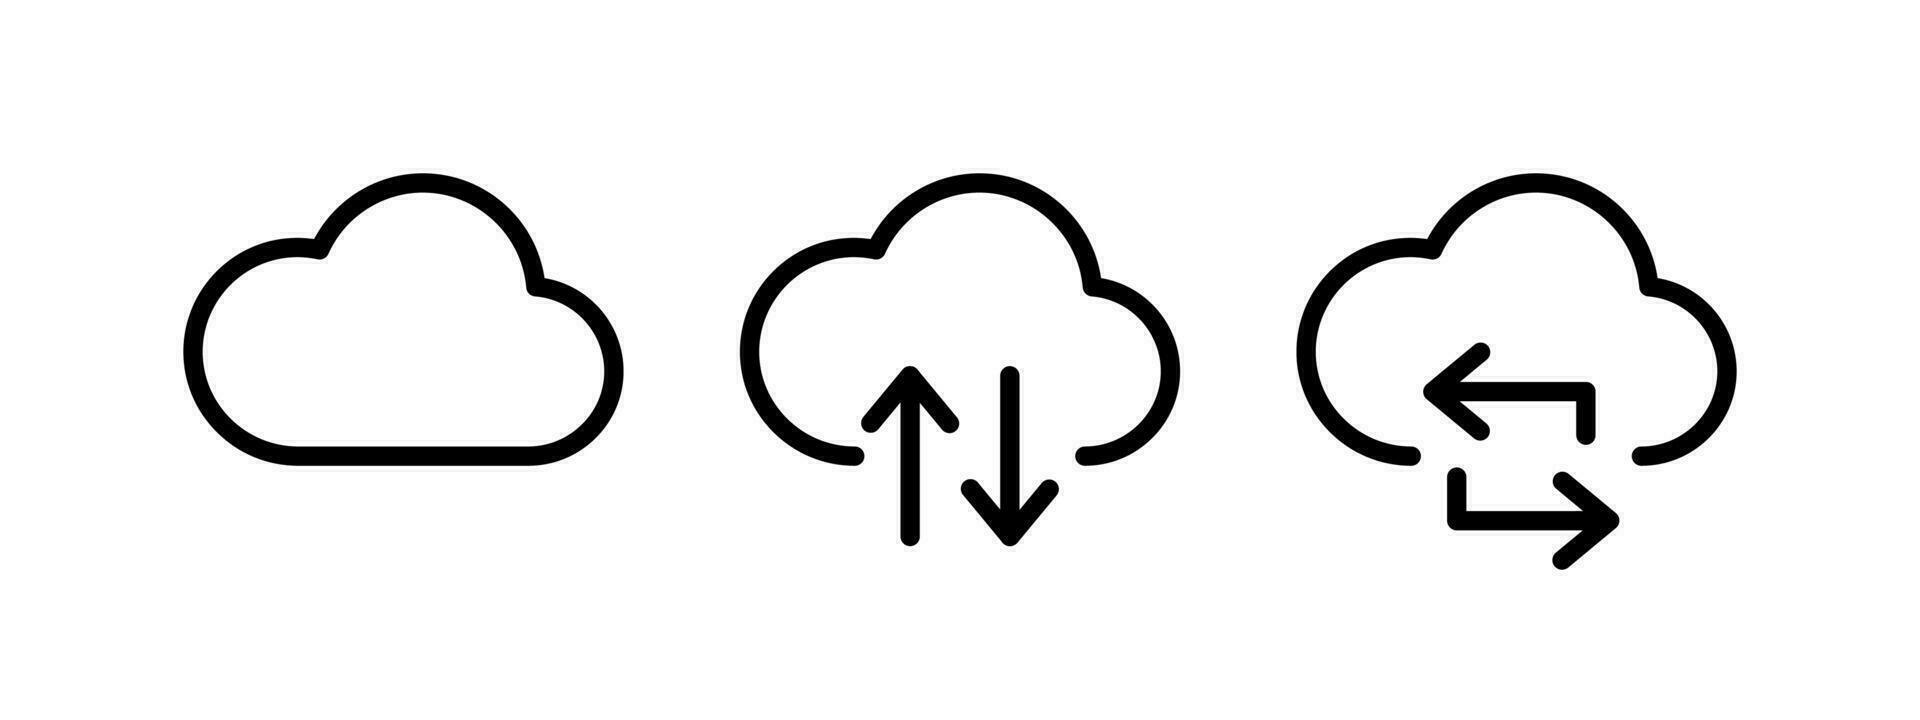 Cloud services. Cloud computing. Vector icons